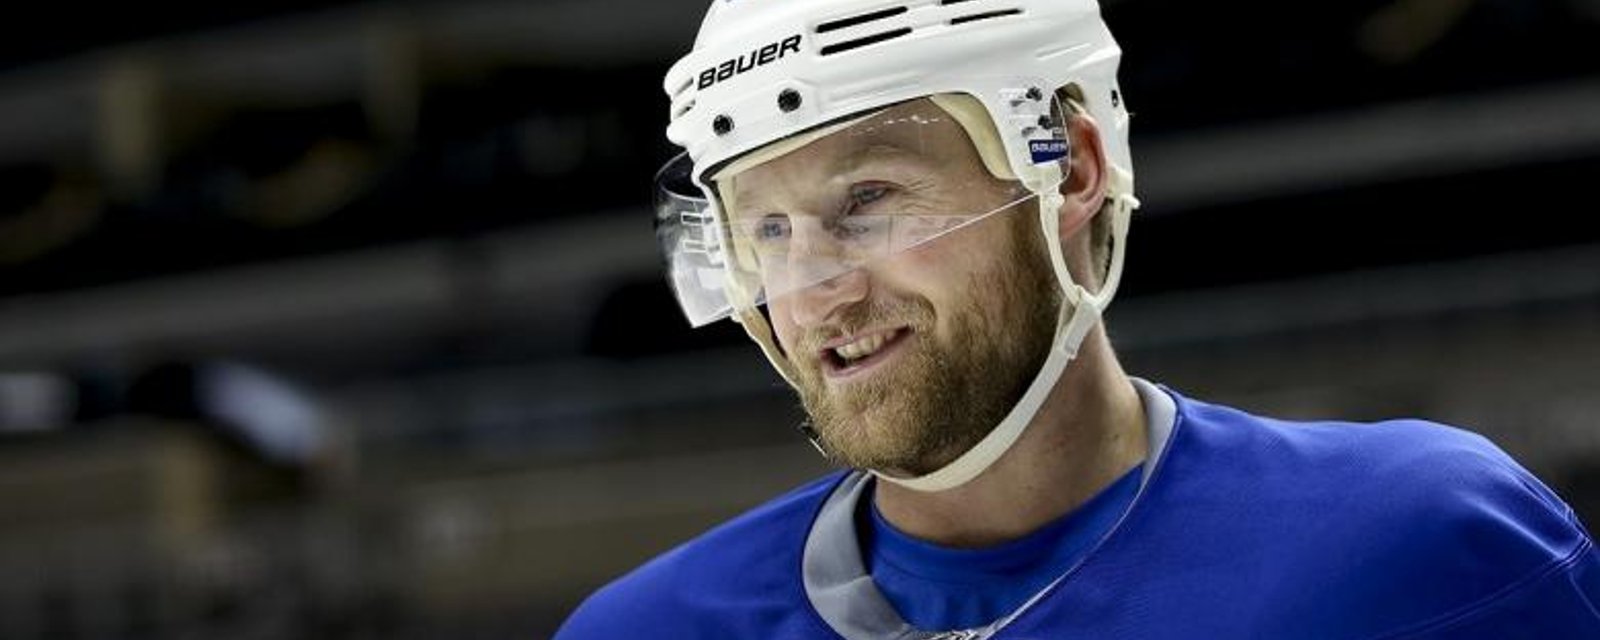 Breaking: Insider reports something big is coming from Stamkos today.